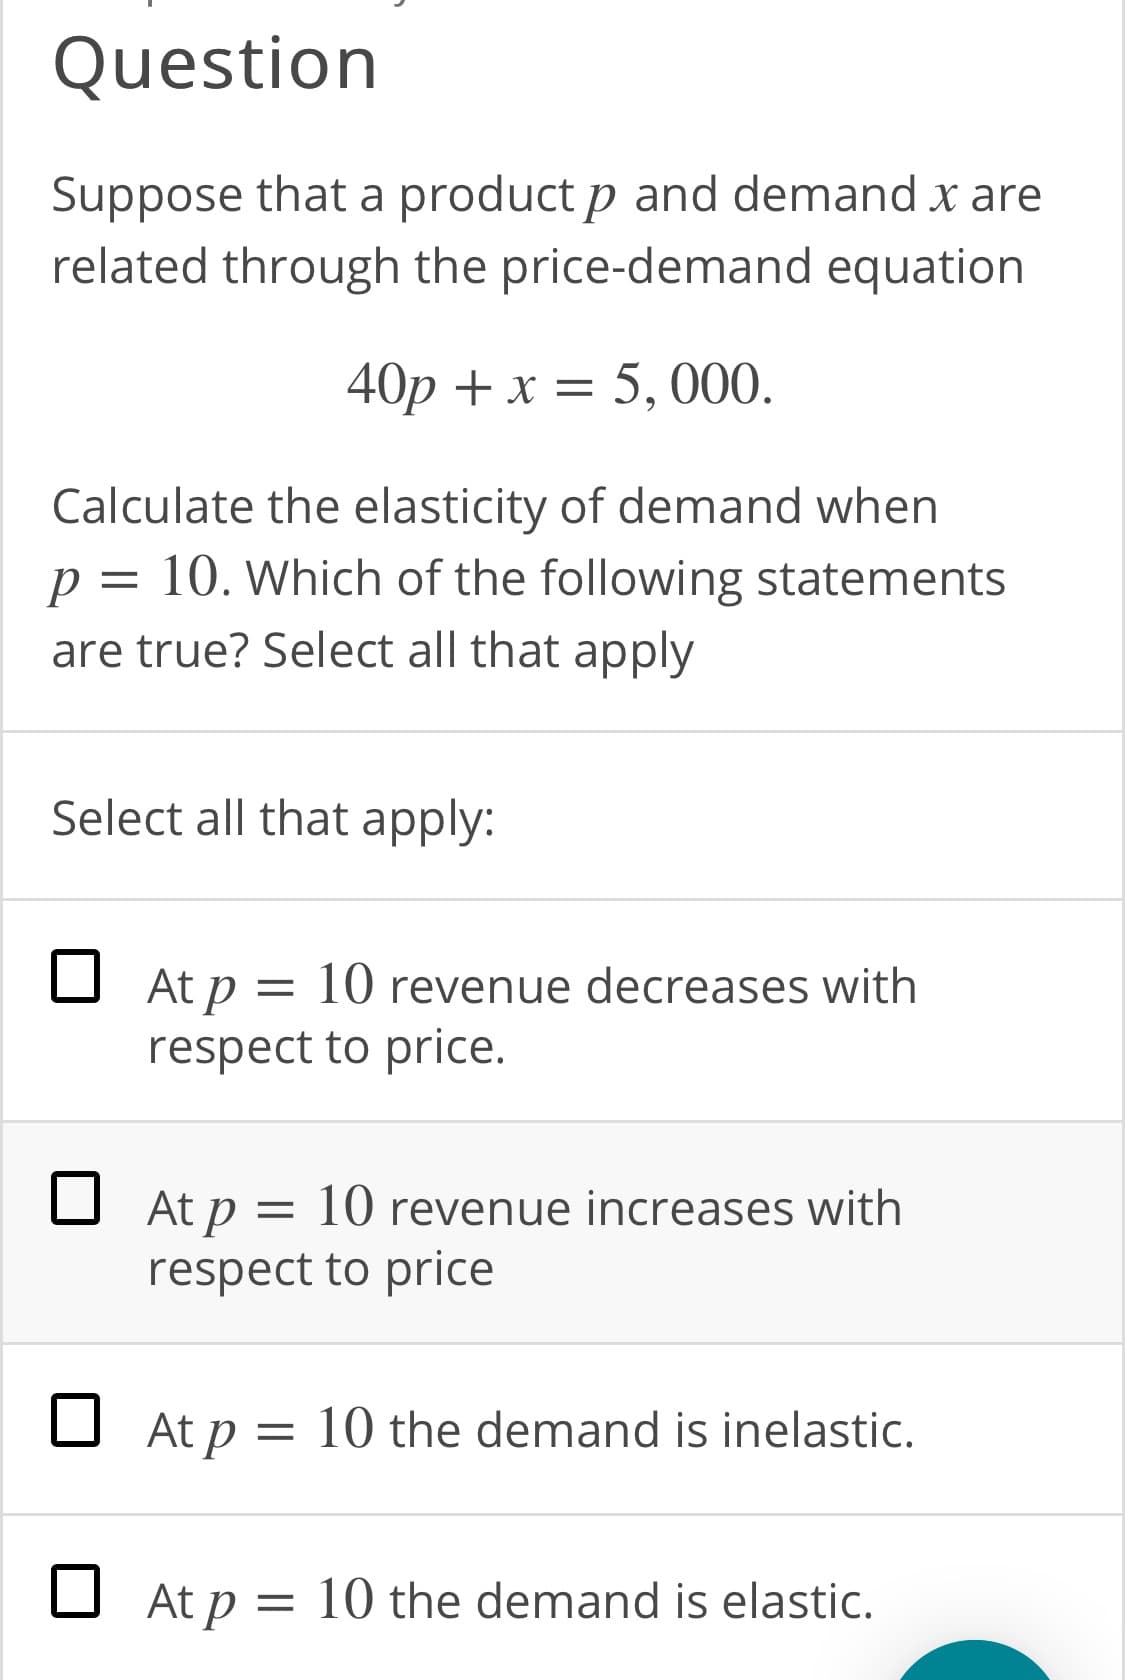 Question
Suppose that a product p and demand x are
related through the price-demand equation
40p + x = 5, 000.
Calculate the elasticity of demand when
p = 10. Which of the following statements
are true? Select all that apply
Select all that apply:
O At p = 10 revenue decreases with
respect to price.
O At p = 10 revenue increases with
respect to price
O At p = 10 the demand is inelastic.
O At p = 10 the demand is elastic.
